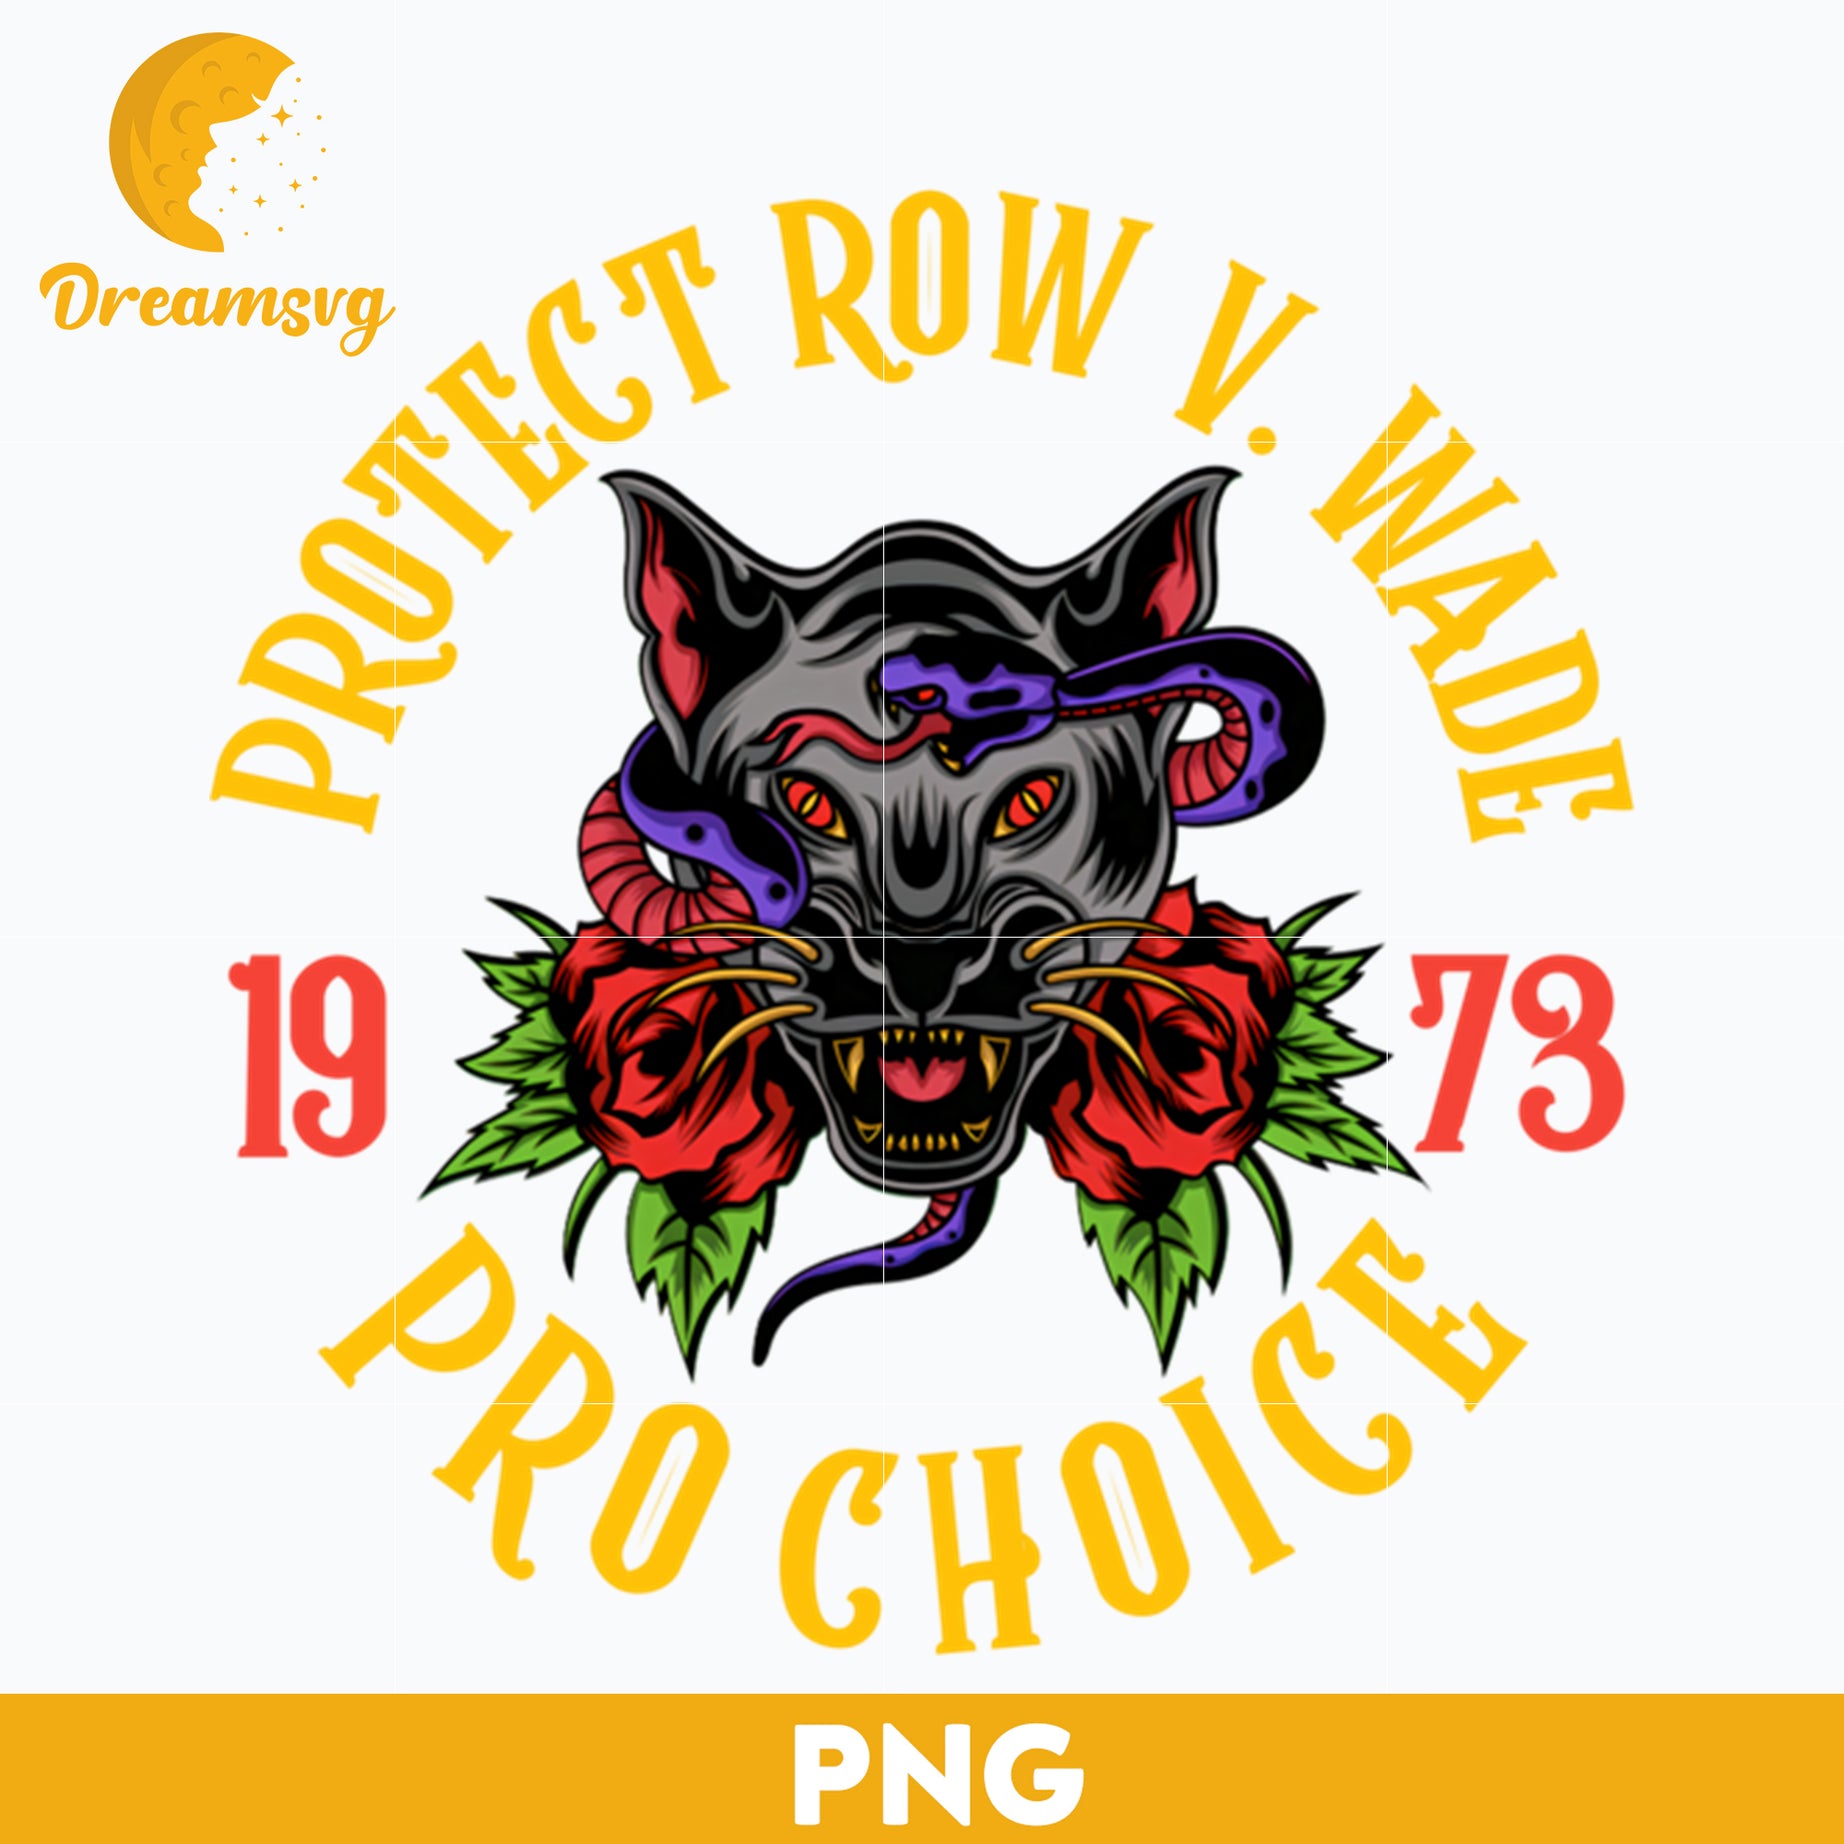 Protect Row V. Wade 1973 Pro Choice PNG, Trending PNG, PNG file, Digital file.